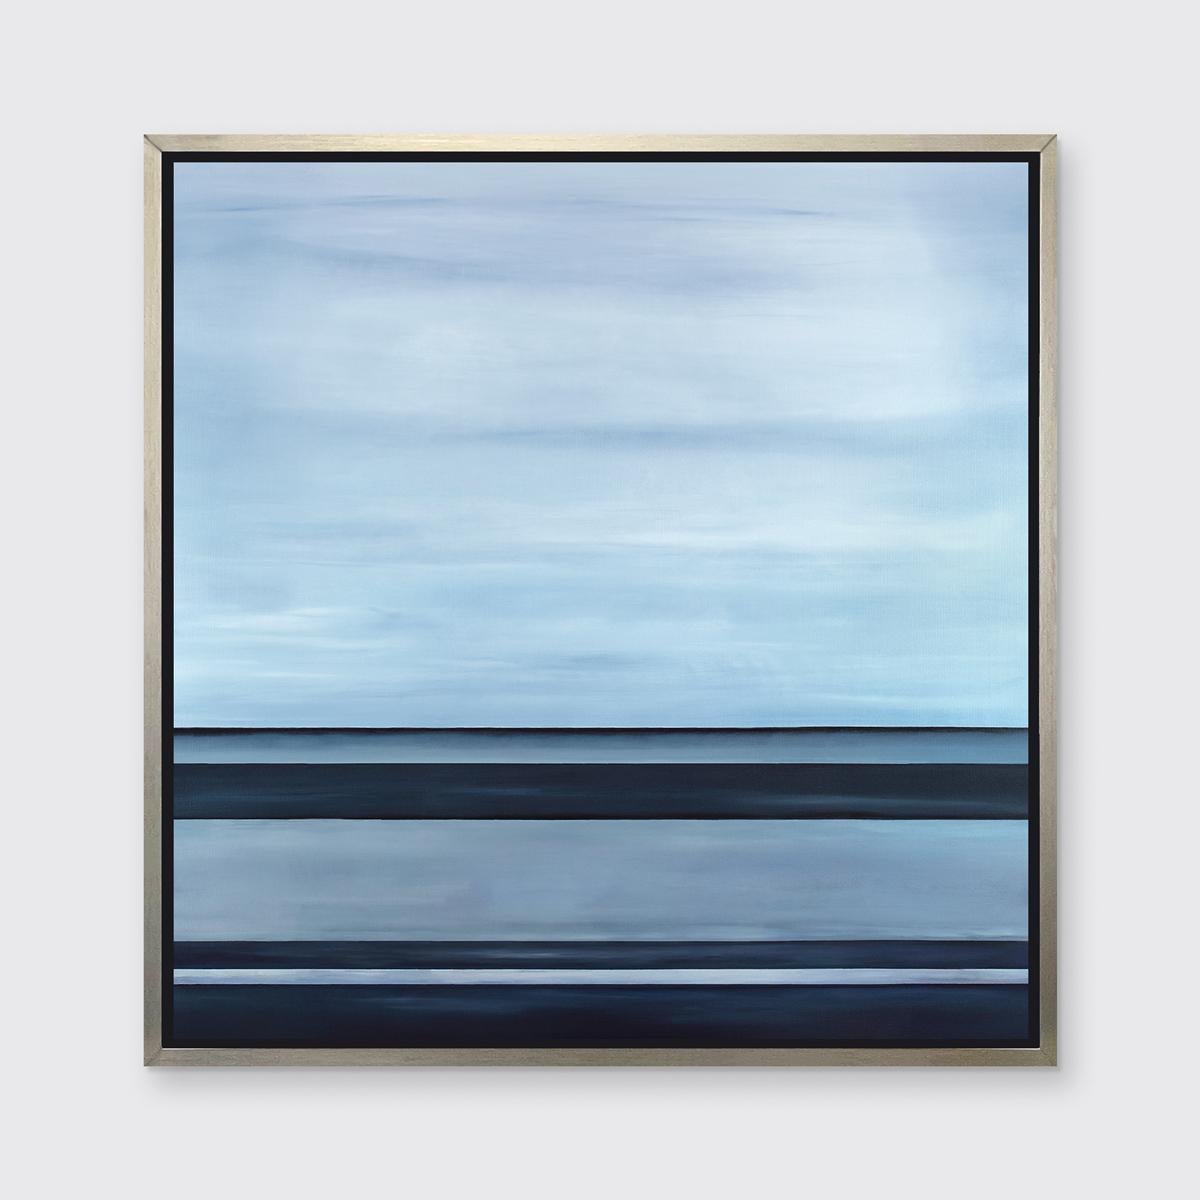 This abstract landscape limited edition print by Tony Iadicicco features a blue and grey palette. The artist pairs soft blended color with stark horizontal lines which create a landscape composition and coastal aesthetic. 

This Limited Edition